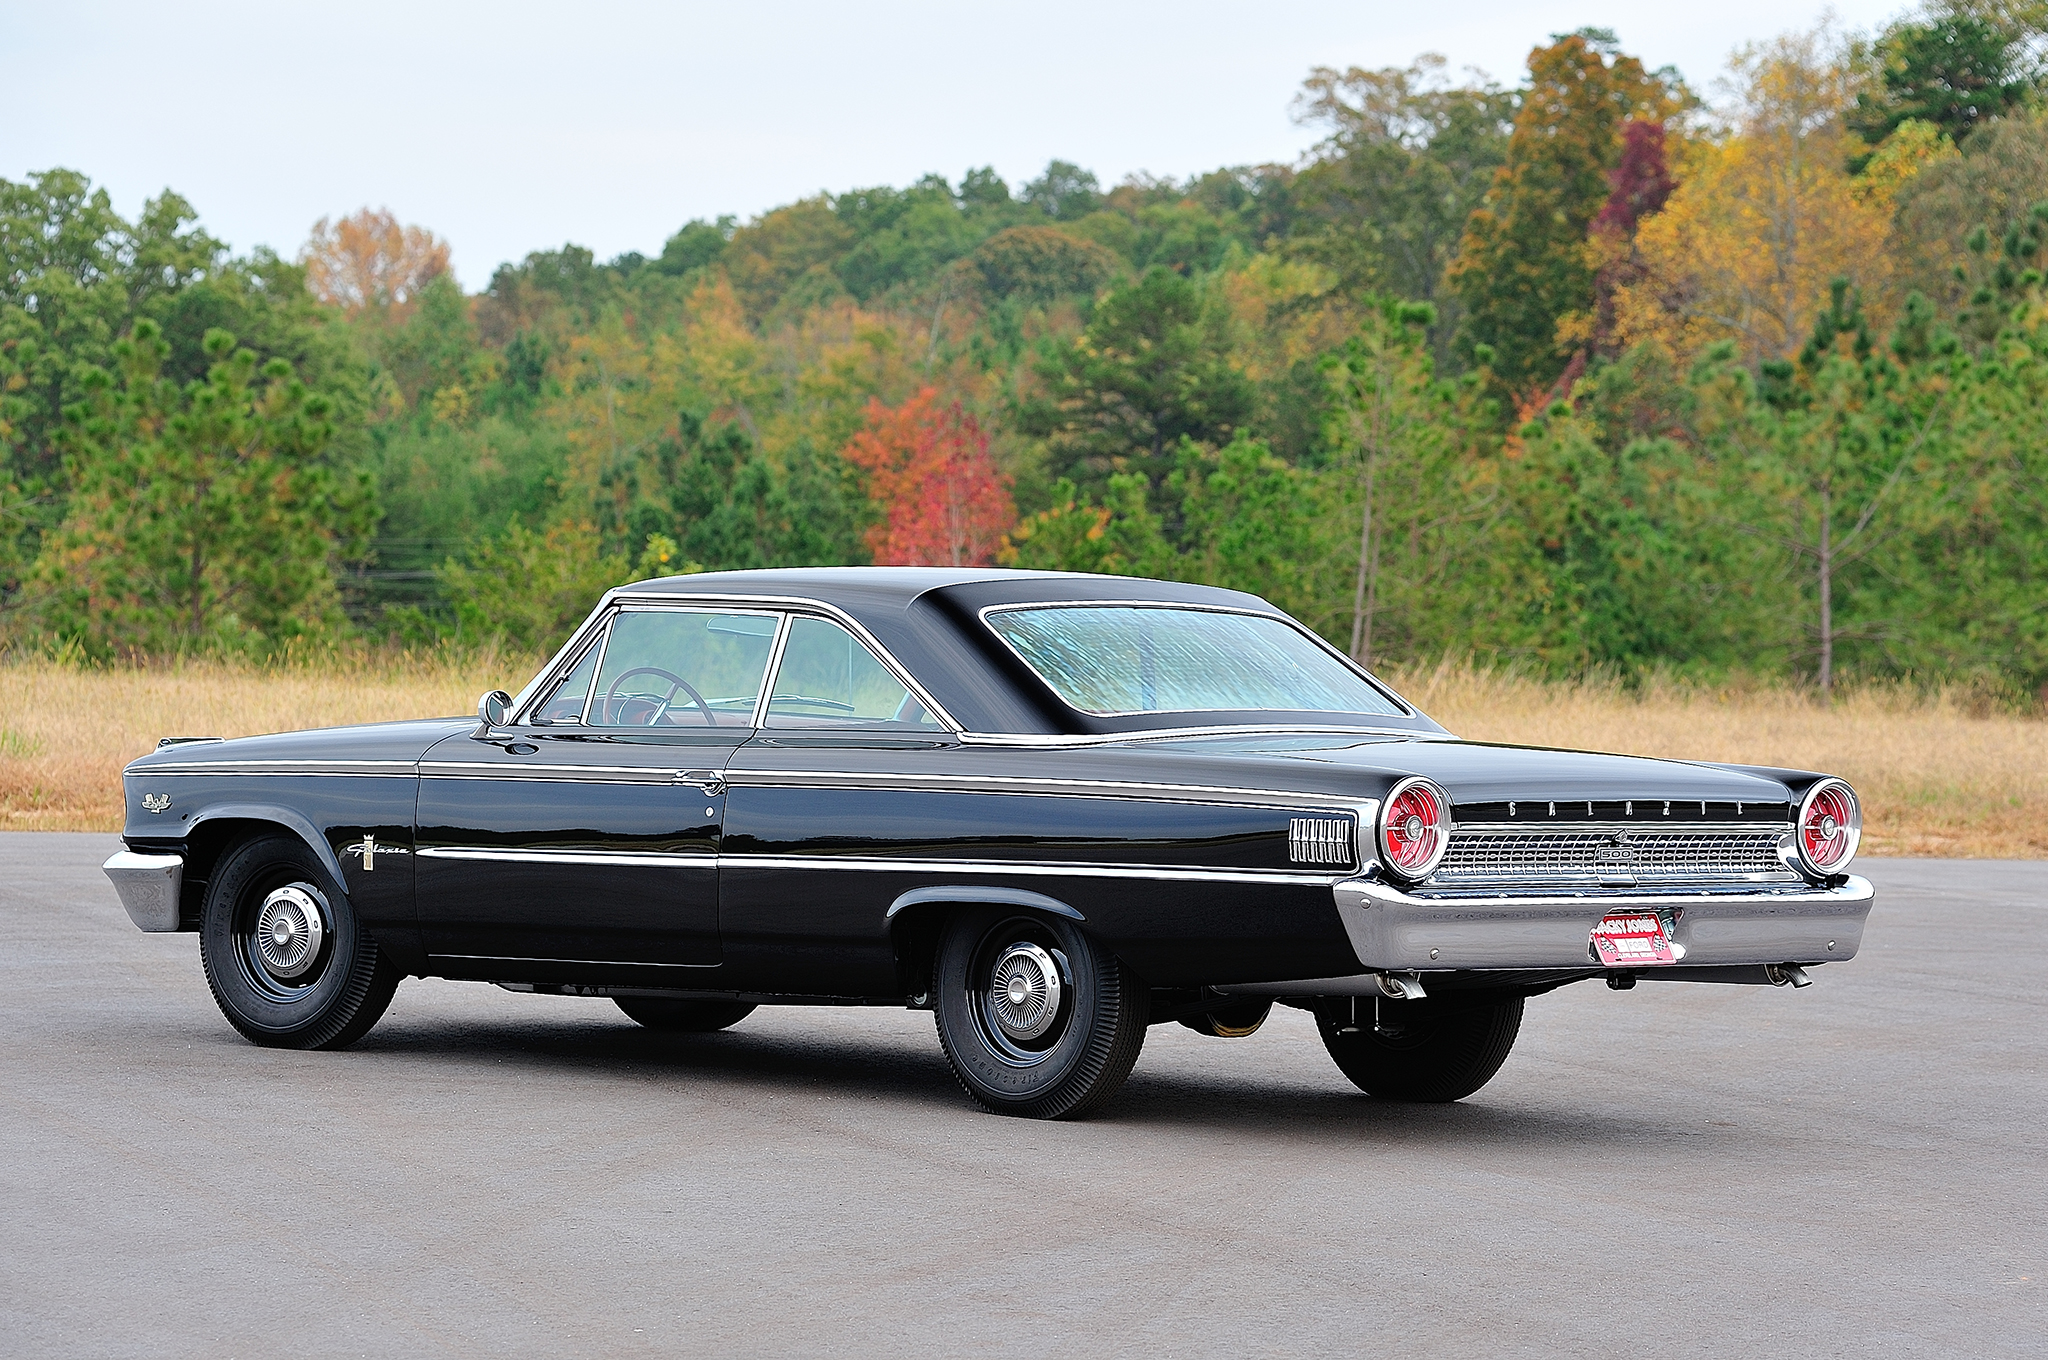 HQ Ford Galaxie Wallpapers | File 2174.26Kb